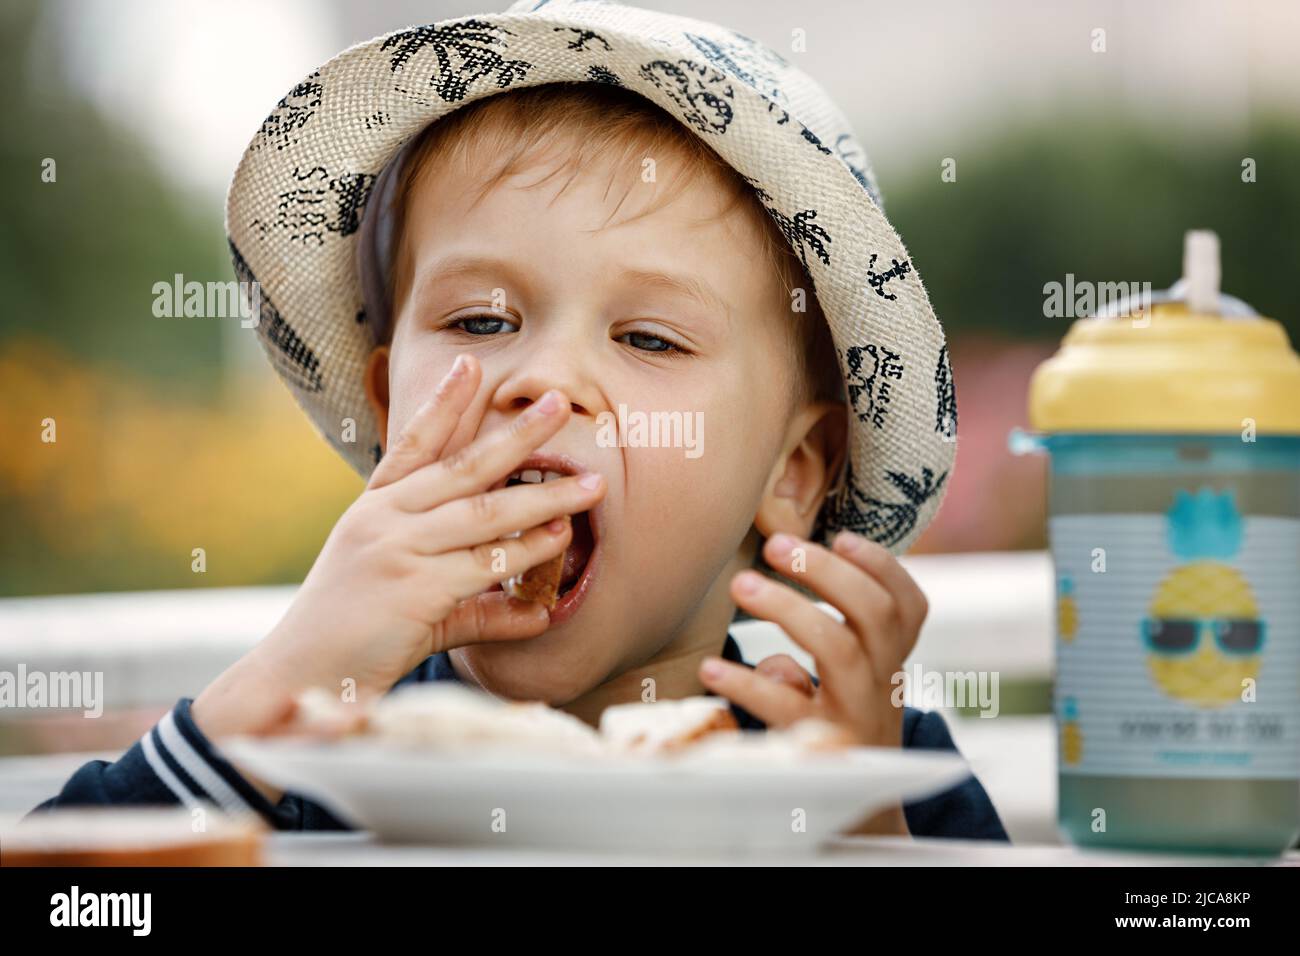 Close up image of Caucasian baby boy with blonde hair and hat opening mouth going to bite crispy bread, having joyful facial expression. Childhood, fo Stock Photo